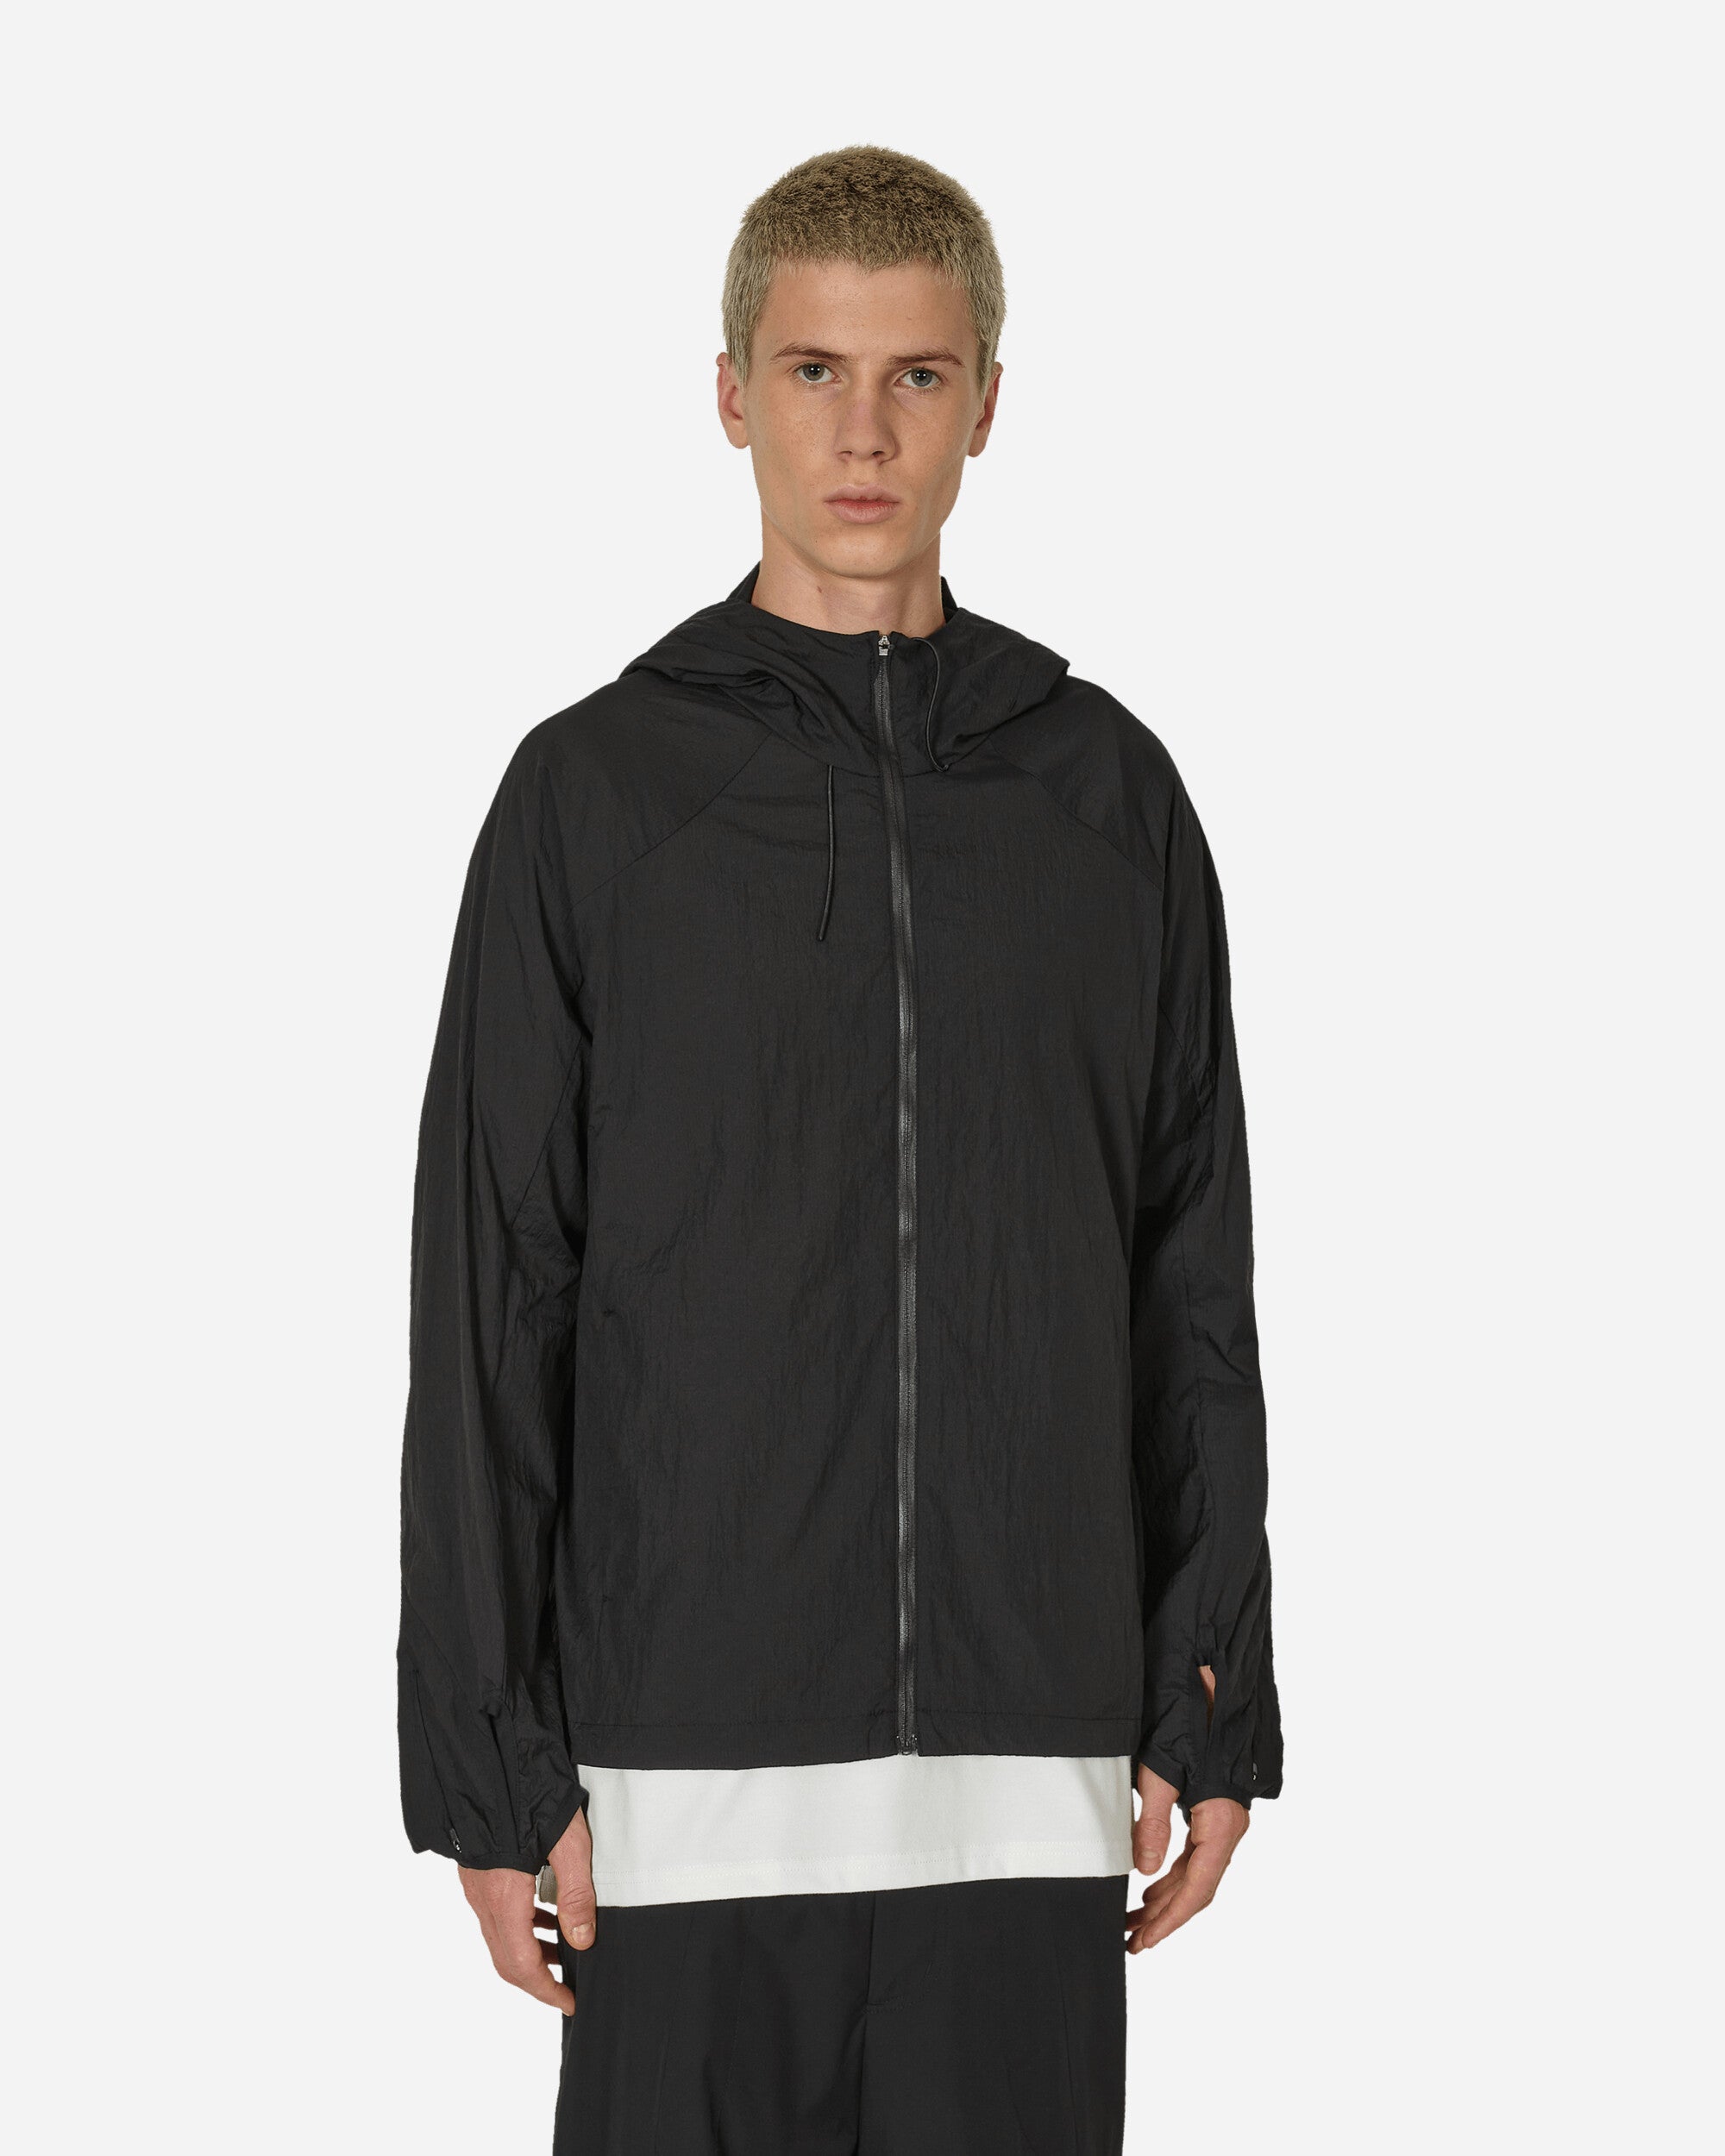 5.1 Technical Jacket (Right) Black